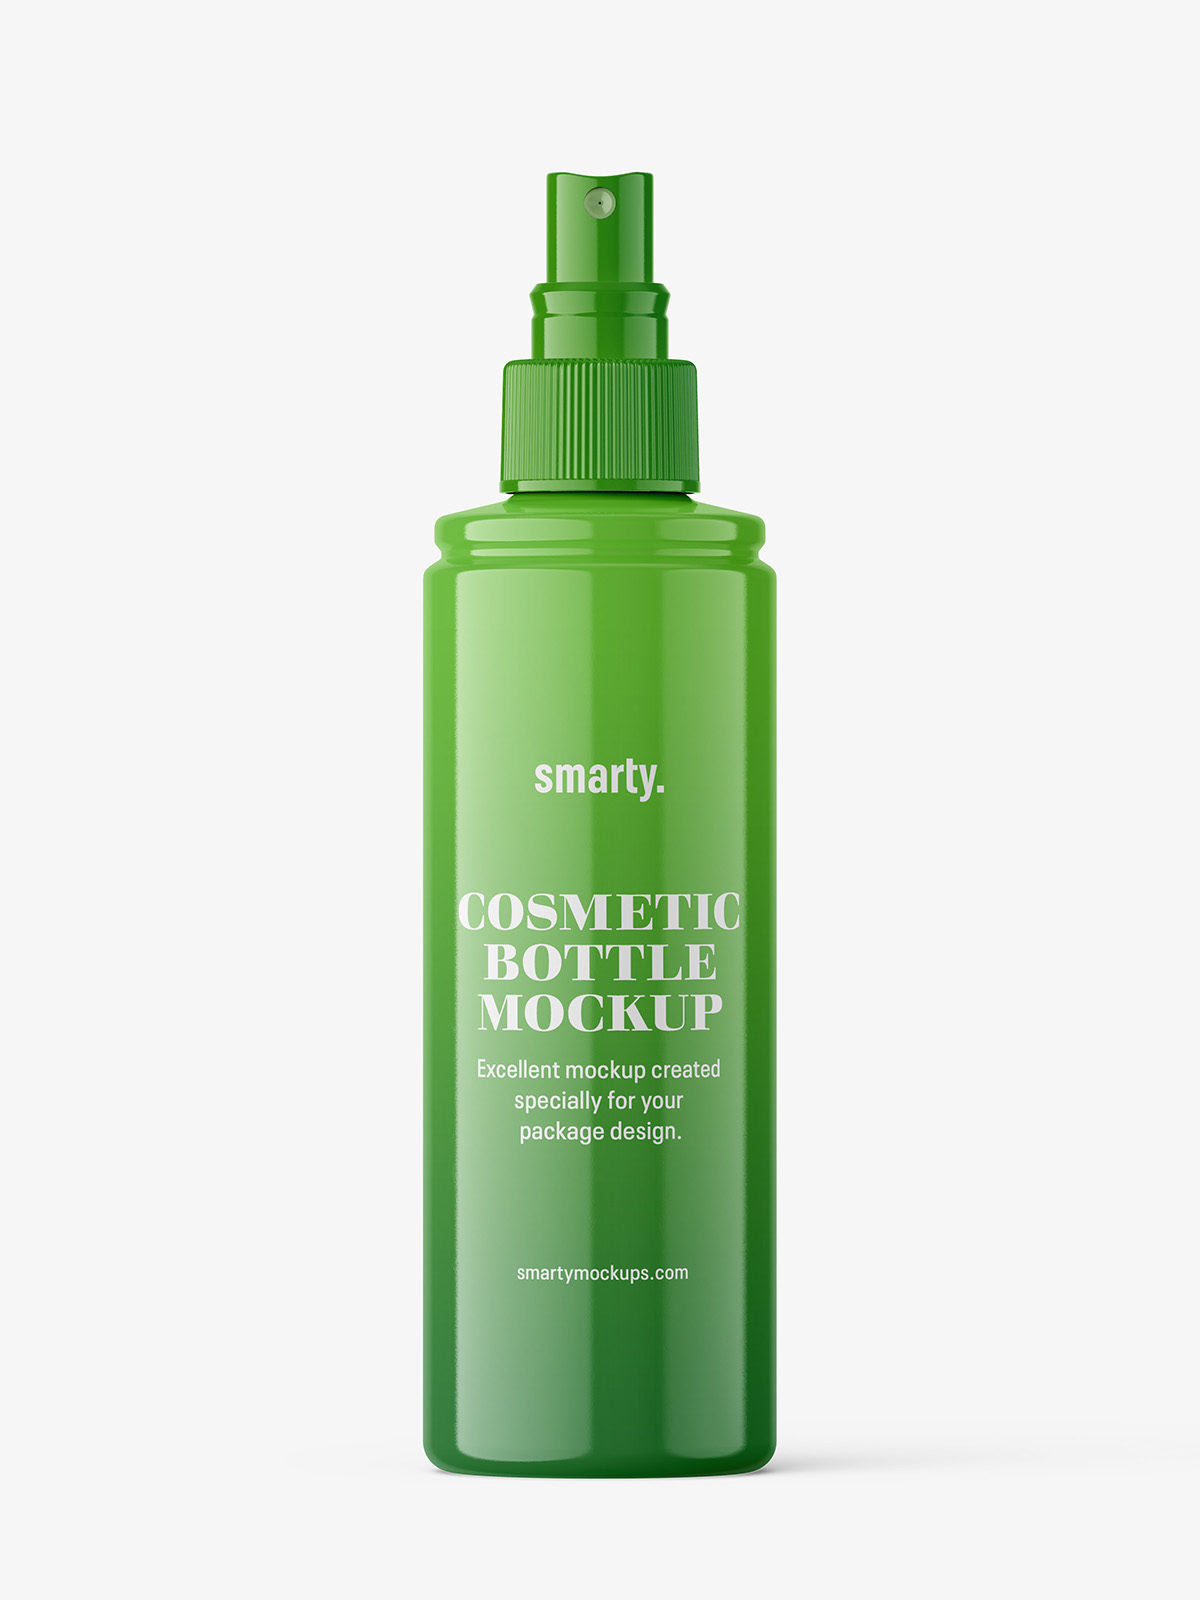 Free glossy bottle with spray cap mockup Smarty Mockups